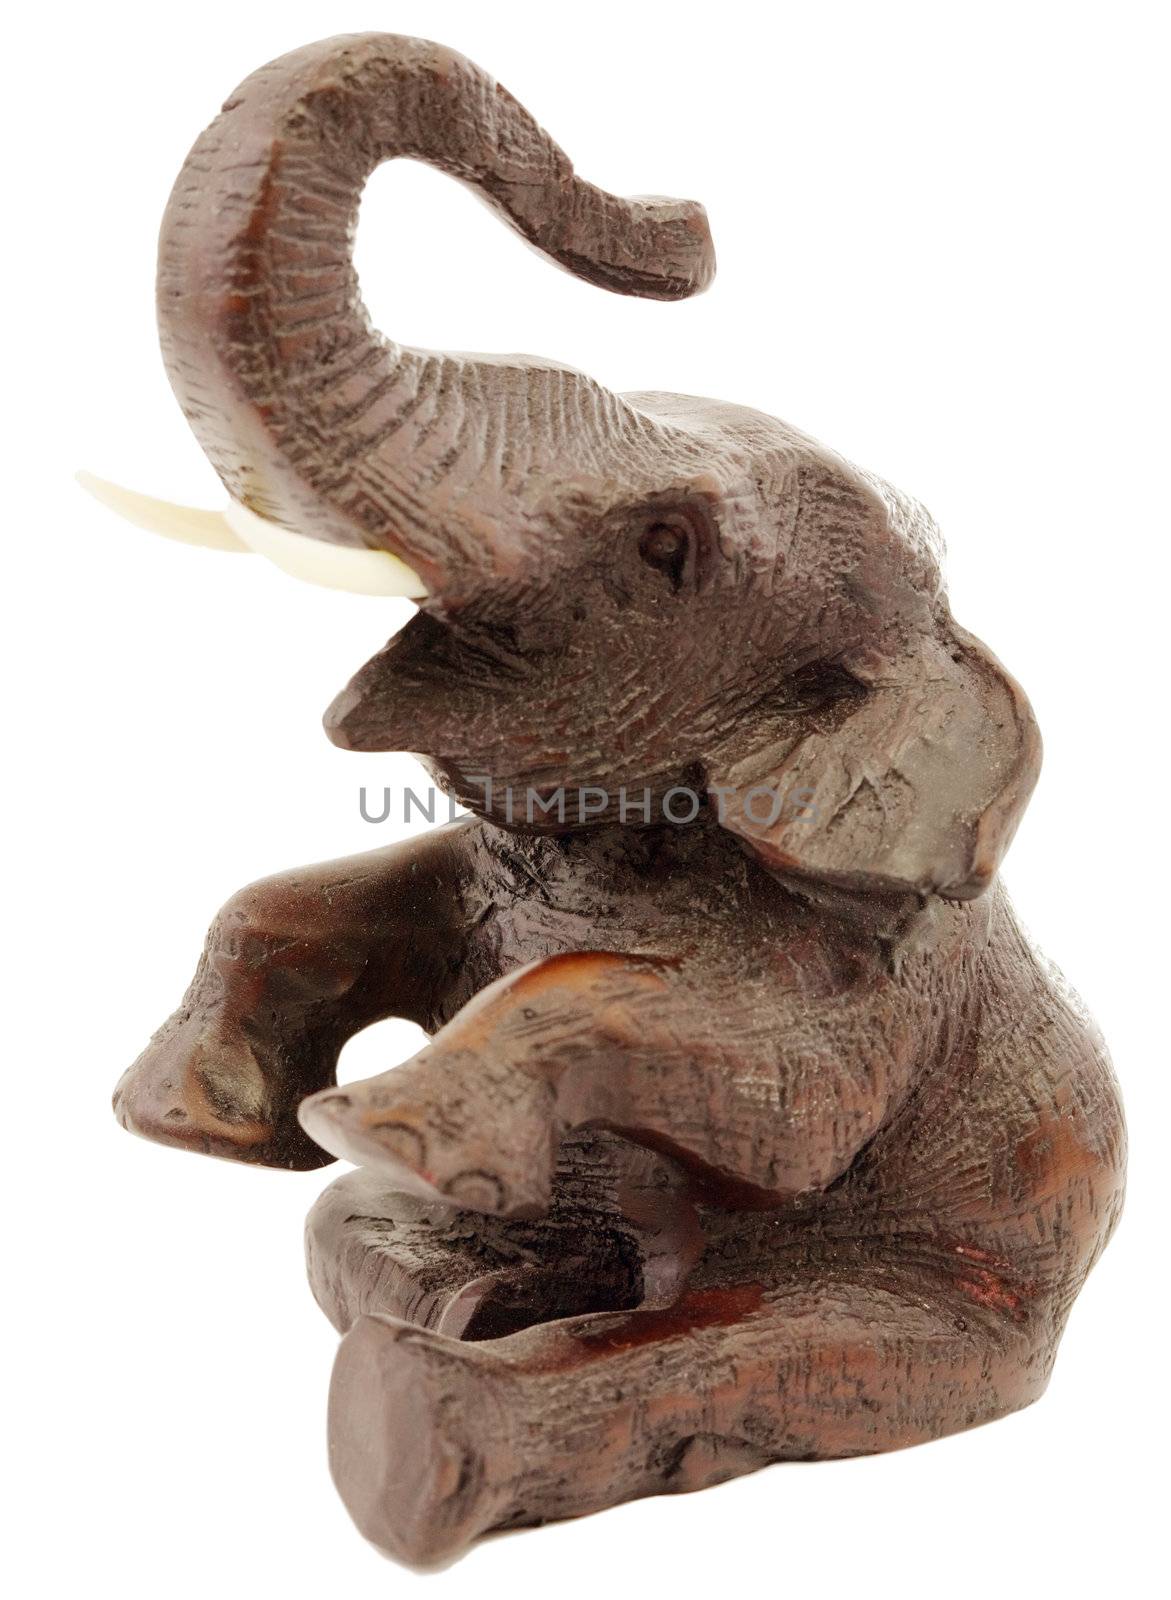 Statuette of elephant by pzaxe